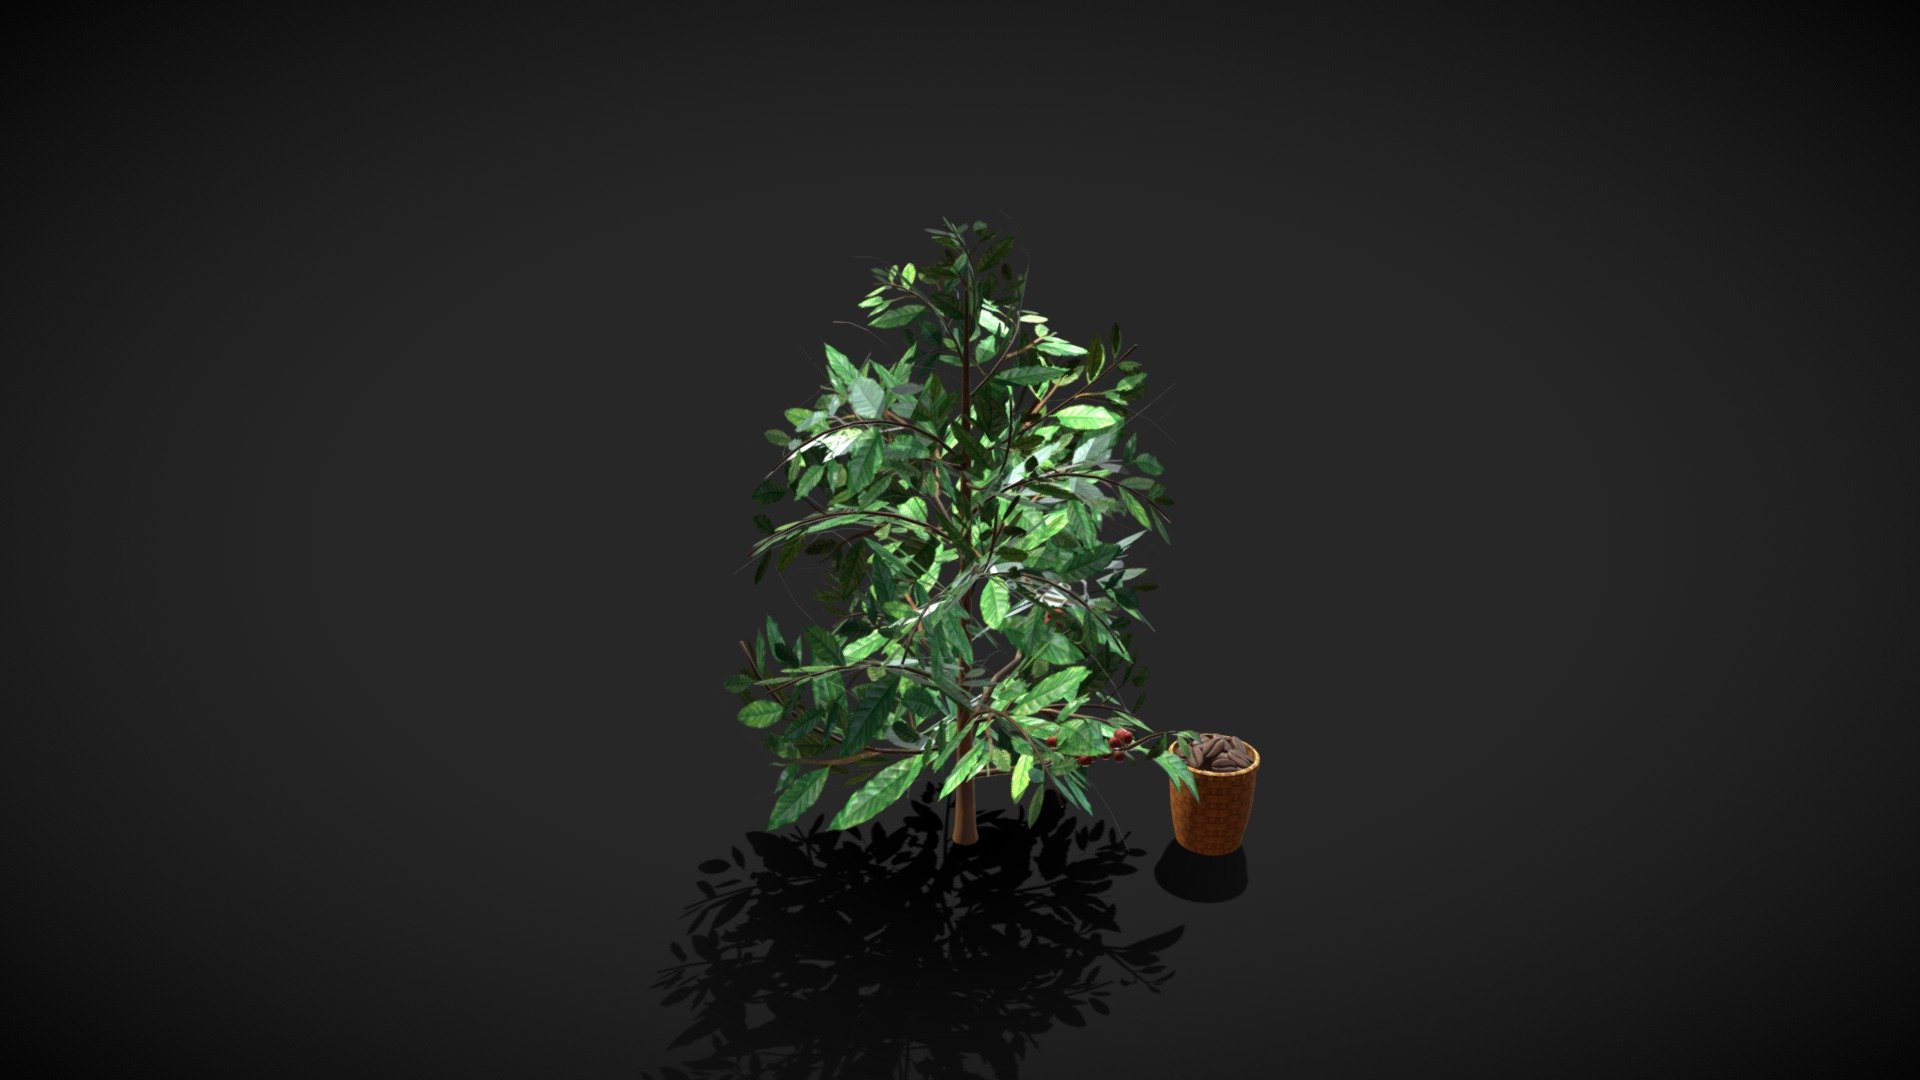 This is a combo of a coffee tree and a coffee picking straw basket like the ones traditionally used when collecting delicious coffee beans in different parts of the world. The coffee beans are separated and can be used as single coffee beans or left attached on the tree 3d model